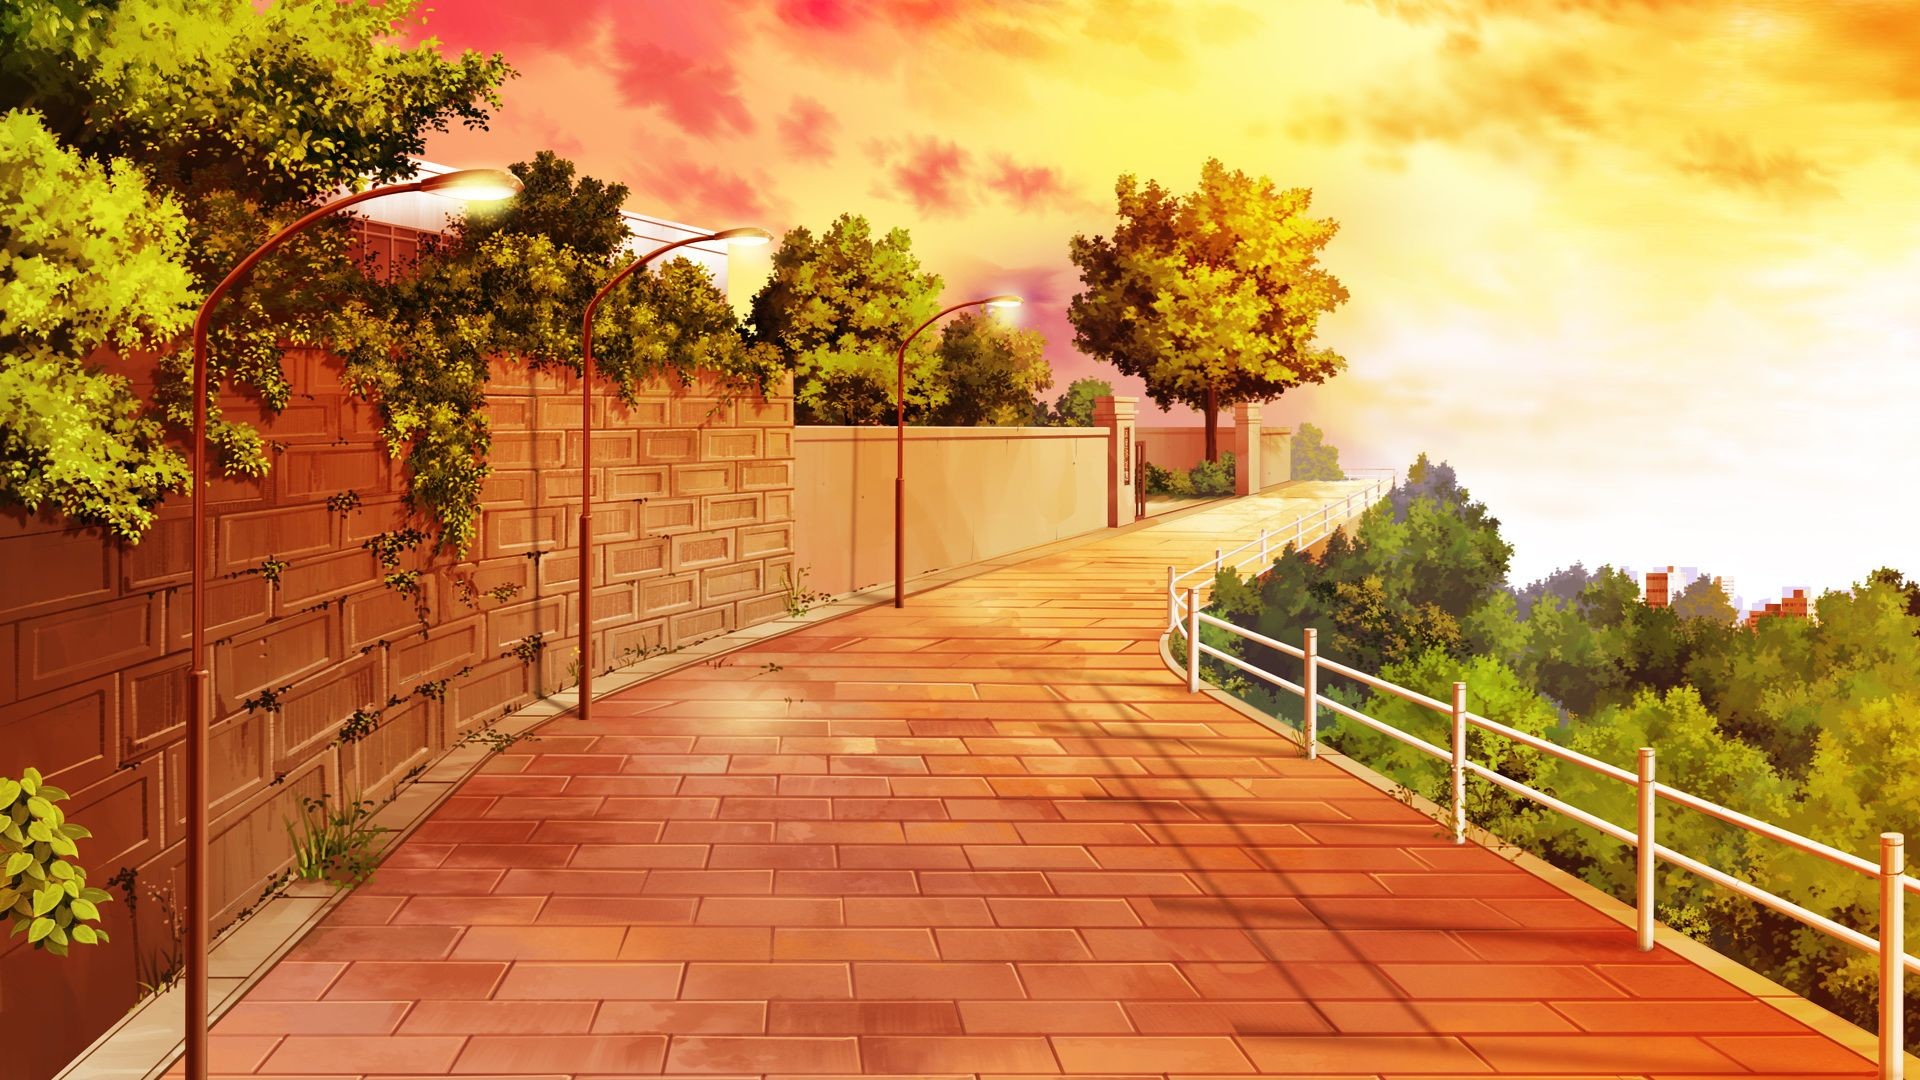 1920x1080 Anime Scenery Backgrounds 03 Wallpaper